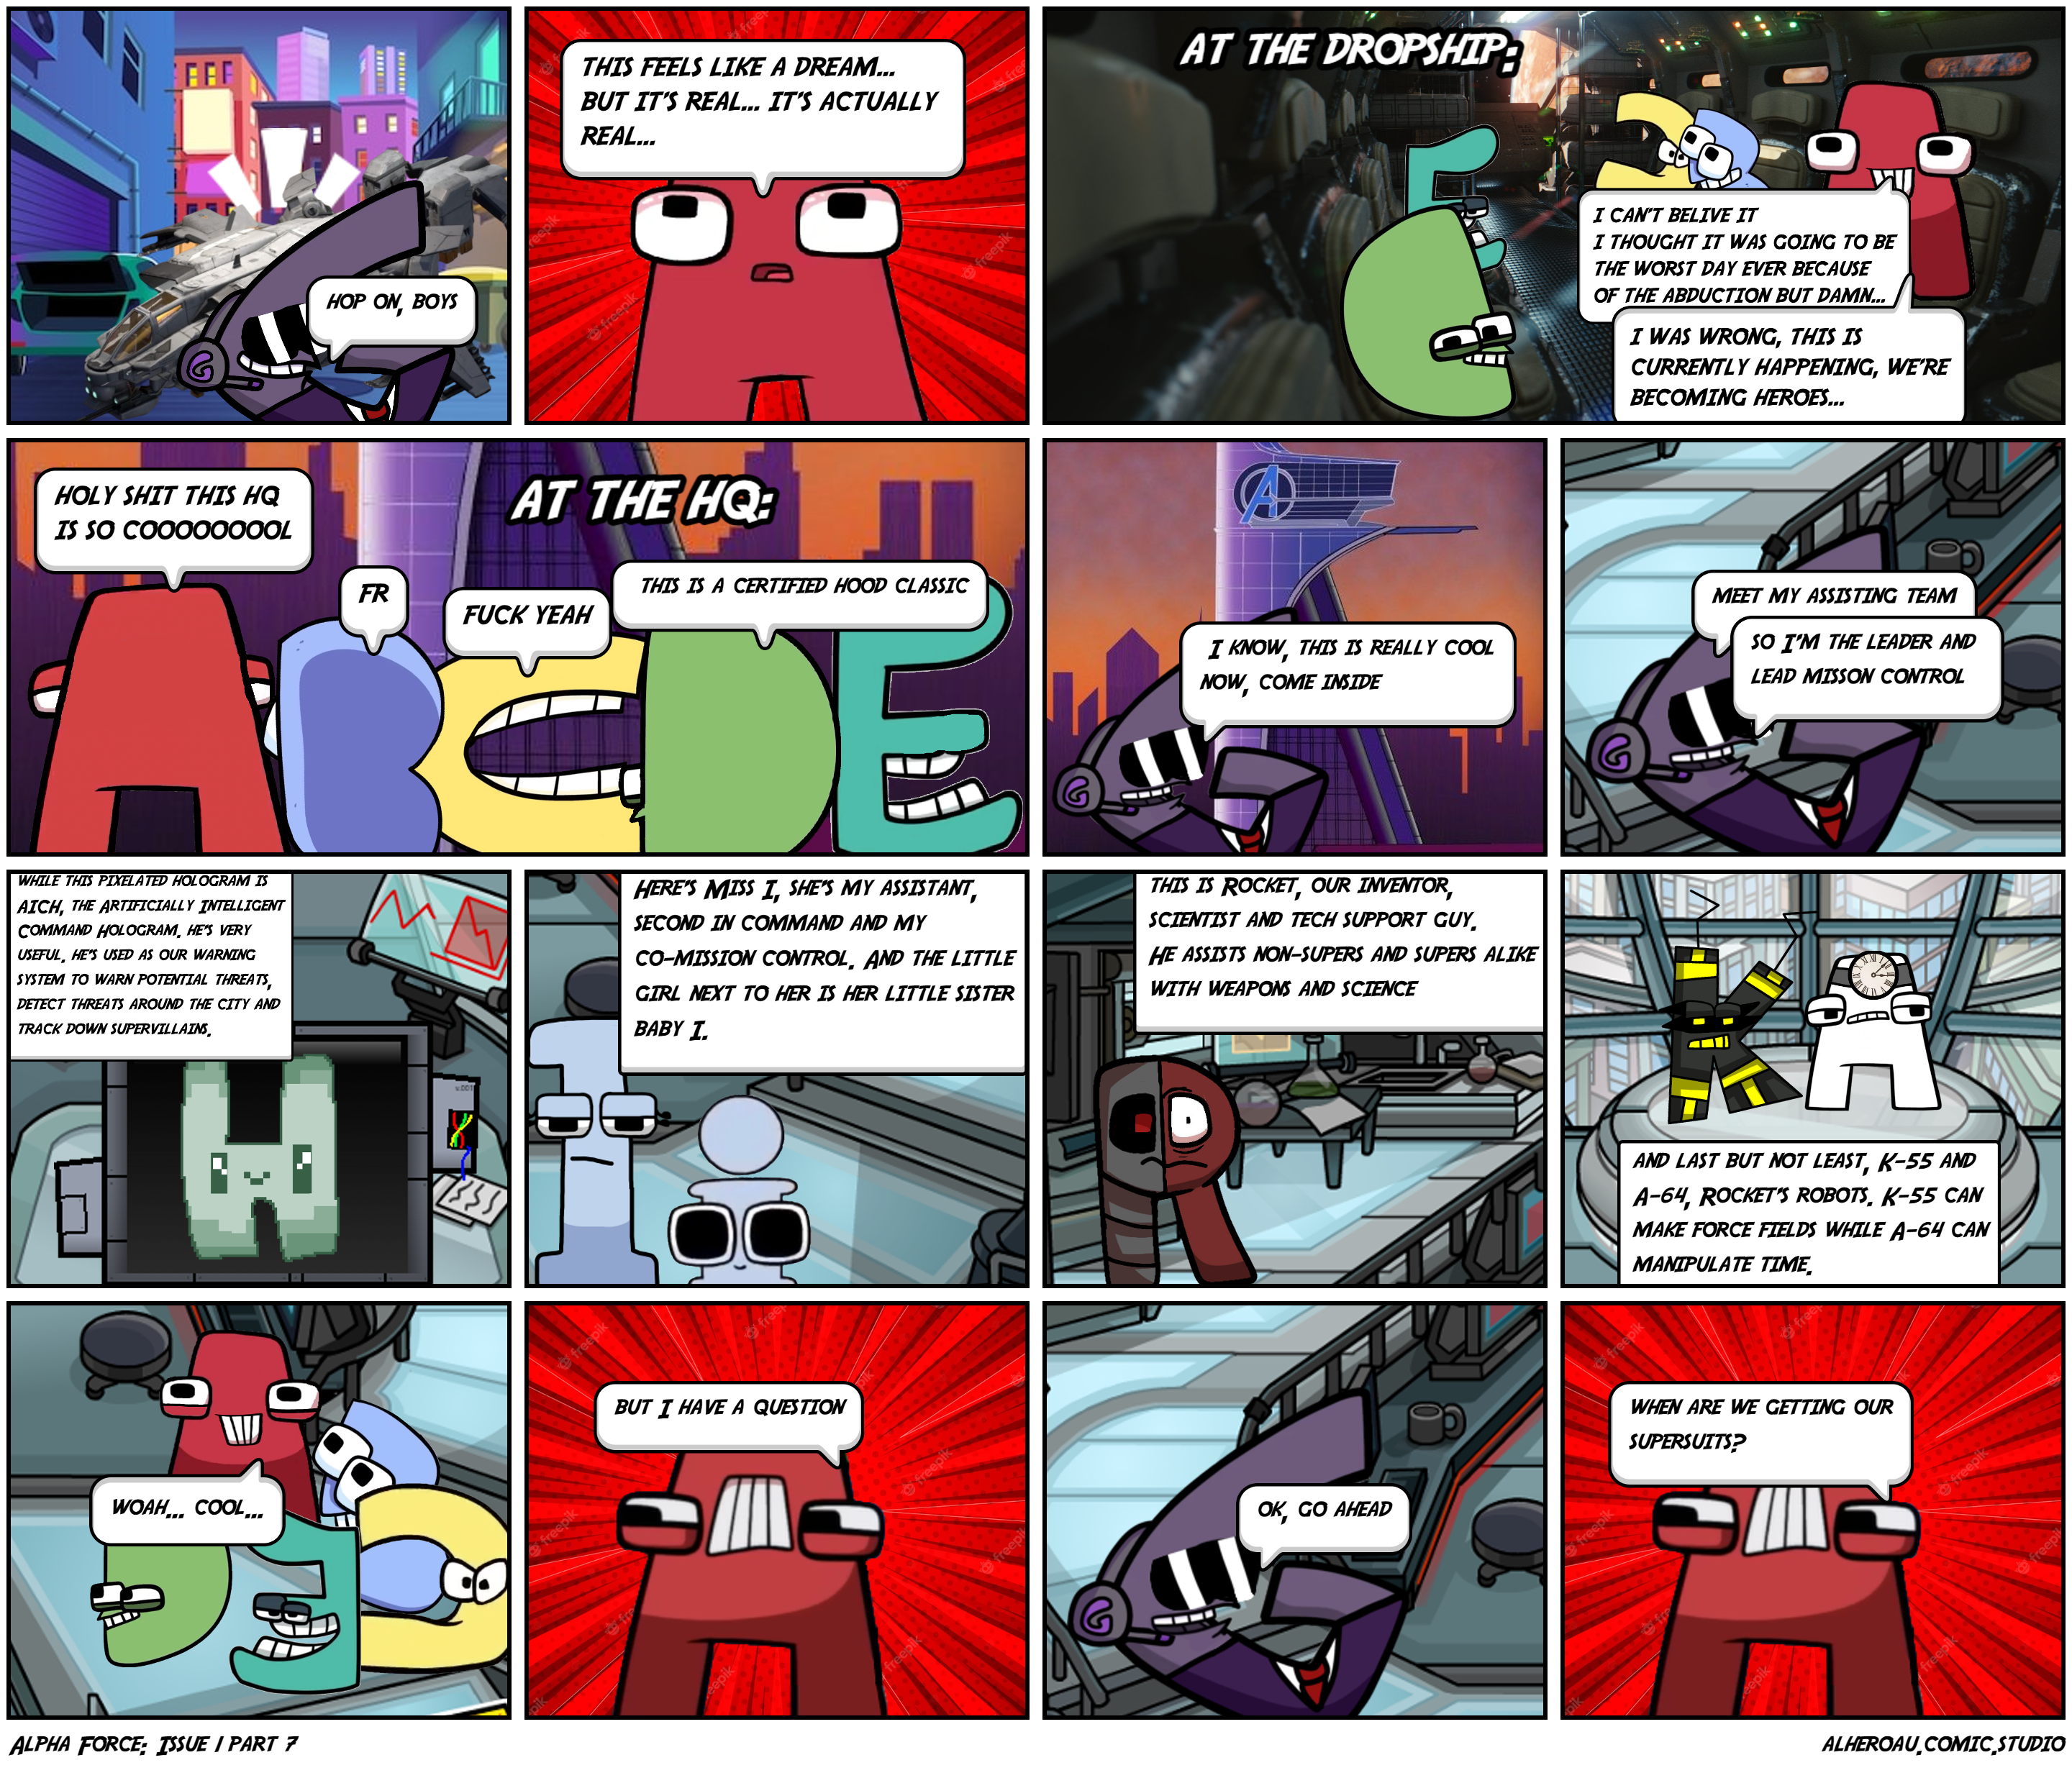 Alpha Force: Issue 1 part 7